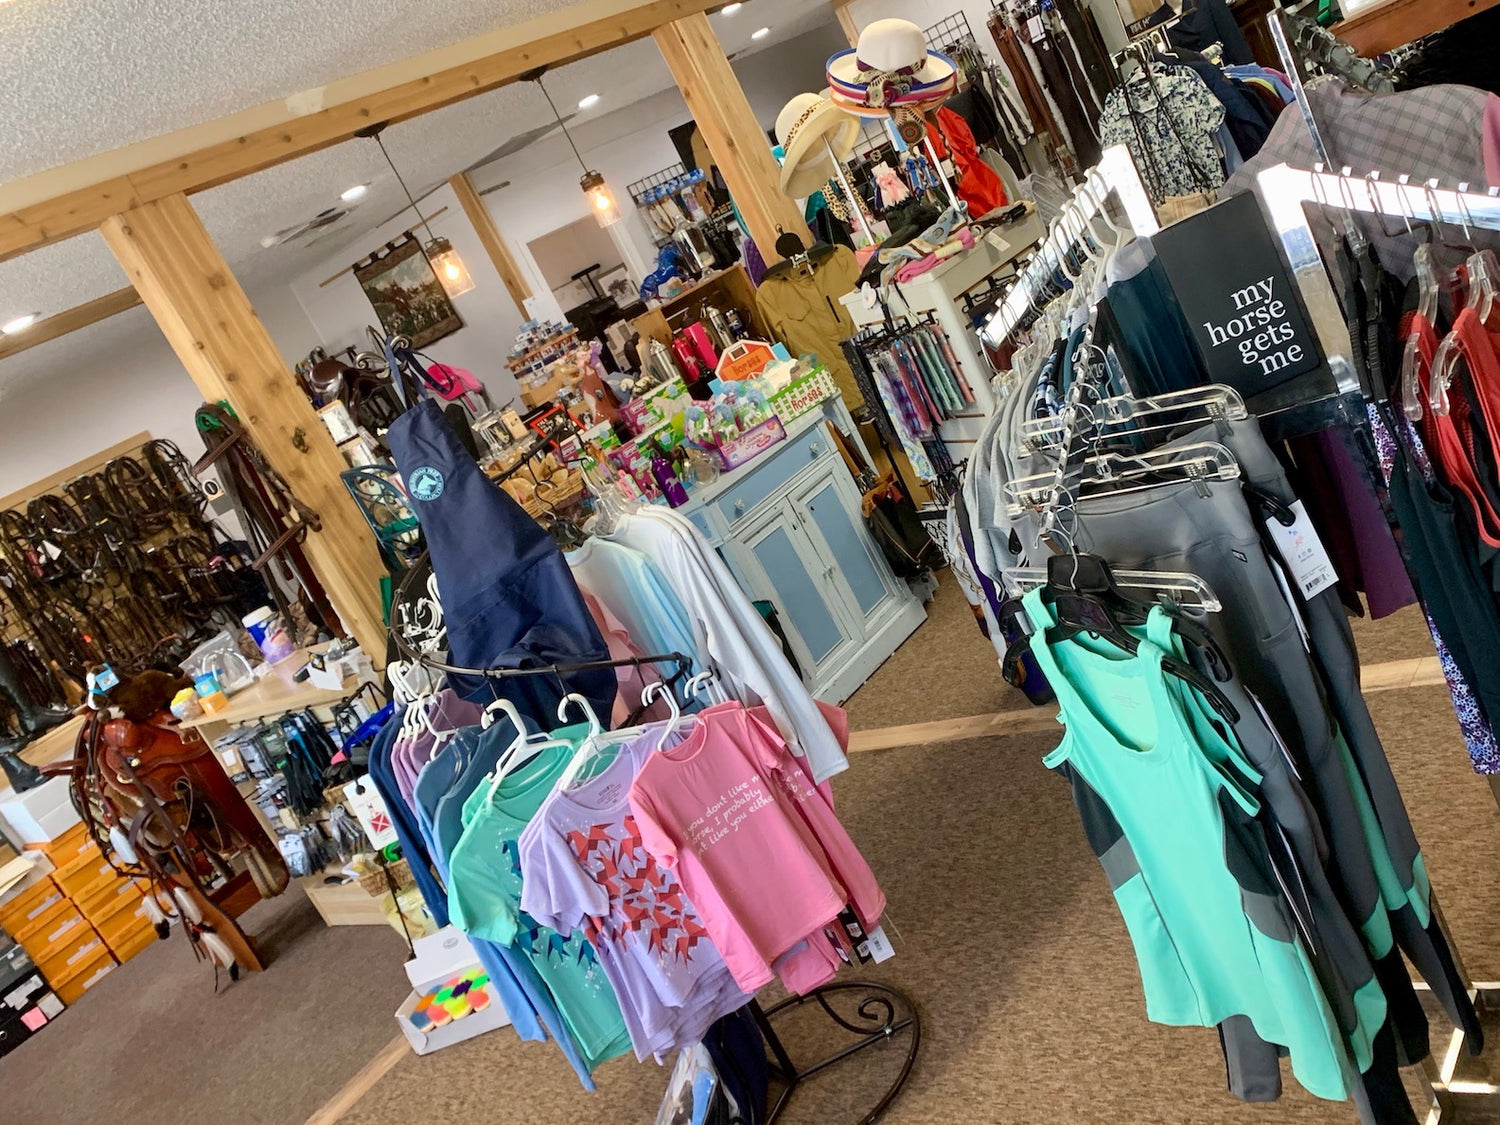 A look inside Oak Hollow Saddlery & Gifts tack shop located in Pinellas County, FL shows english riding apparel, saddles, tack and gifts.